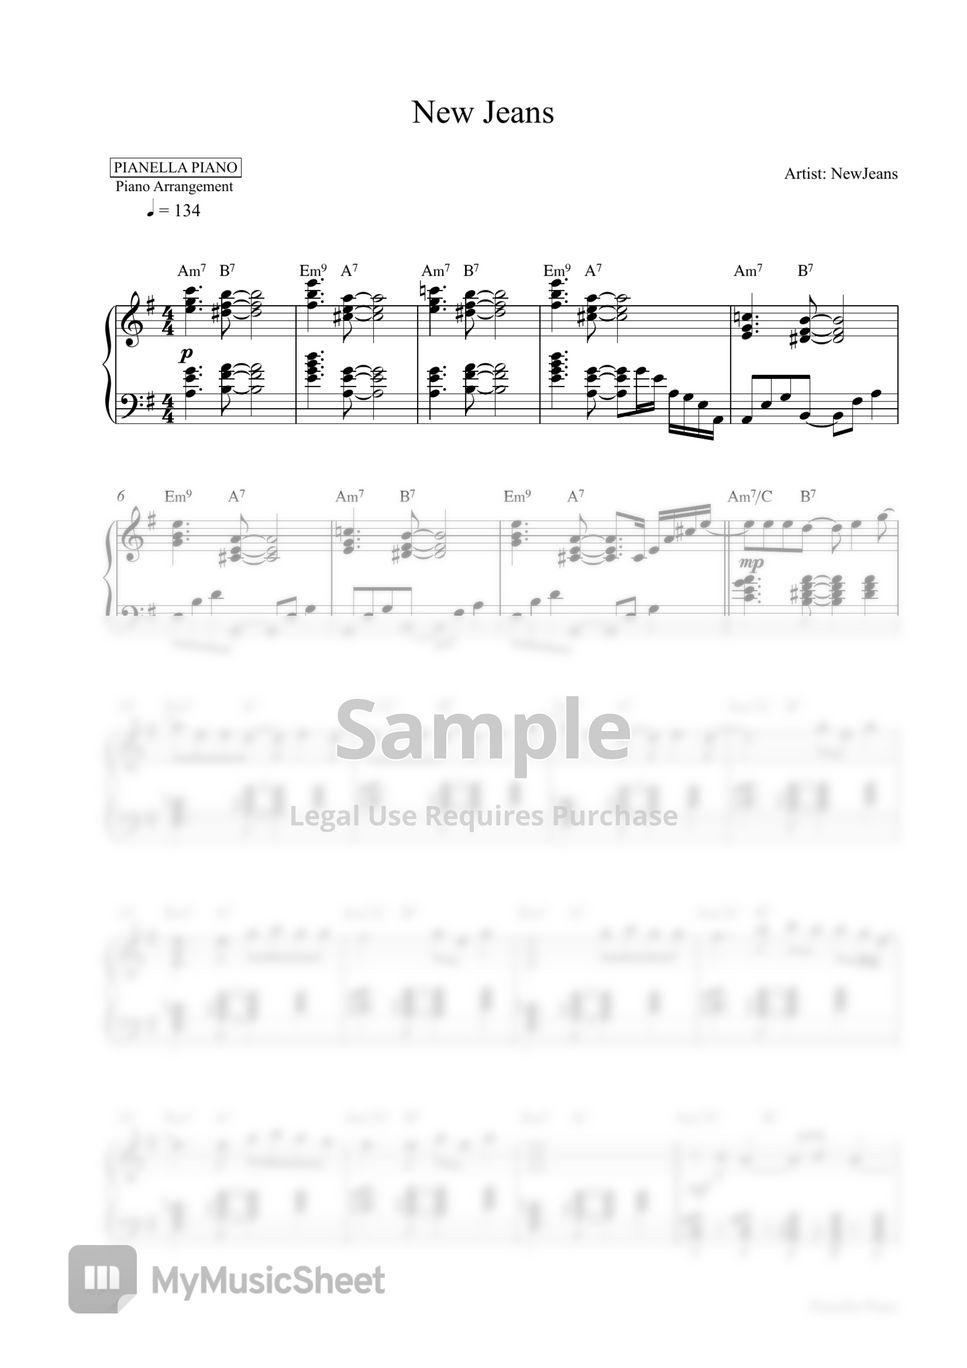 NewJeans New Jeans (PIANO SHEET) Sheets by Pianella Piano